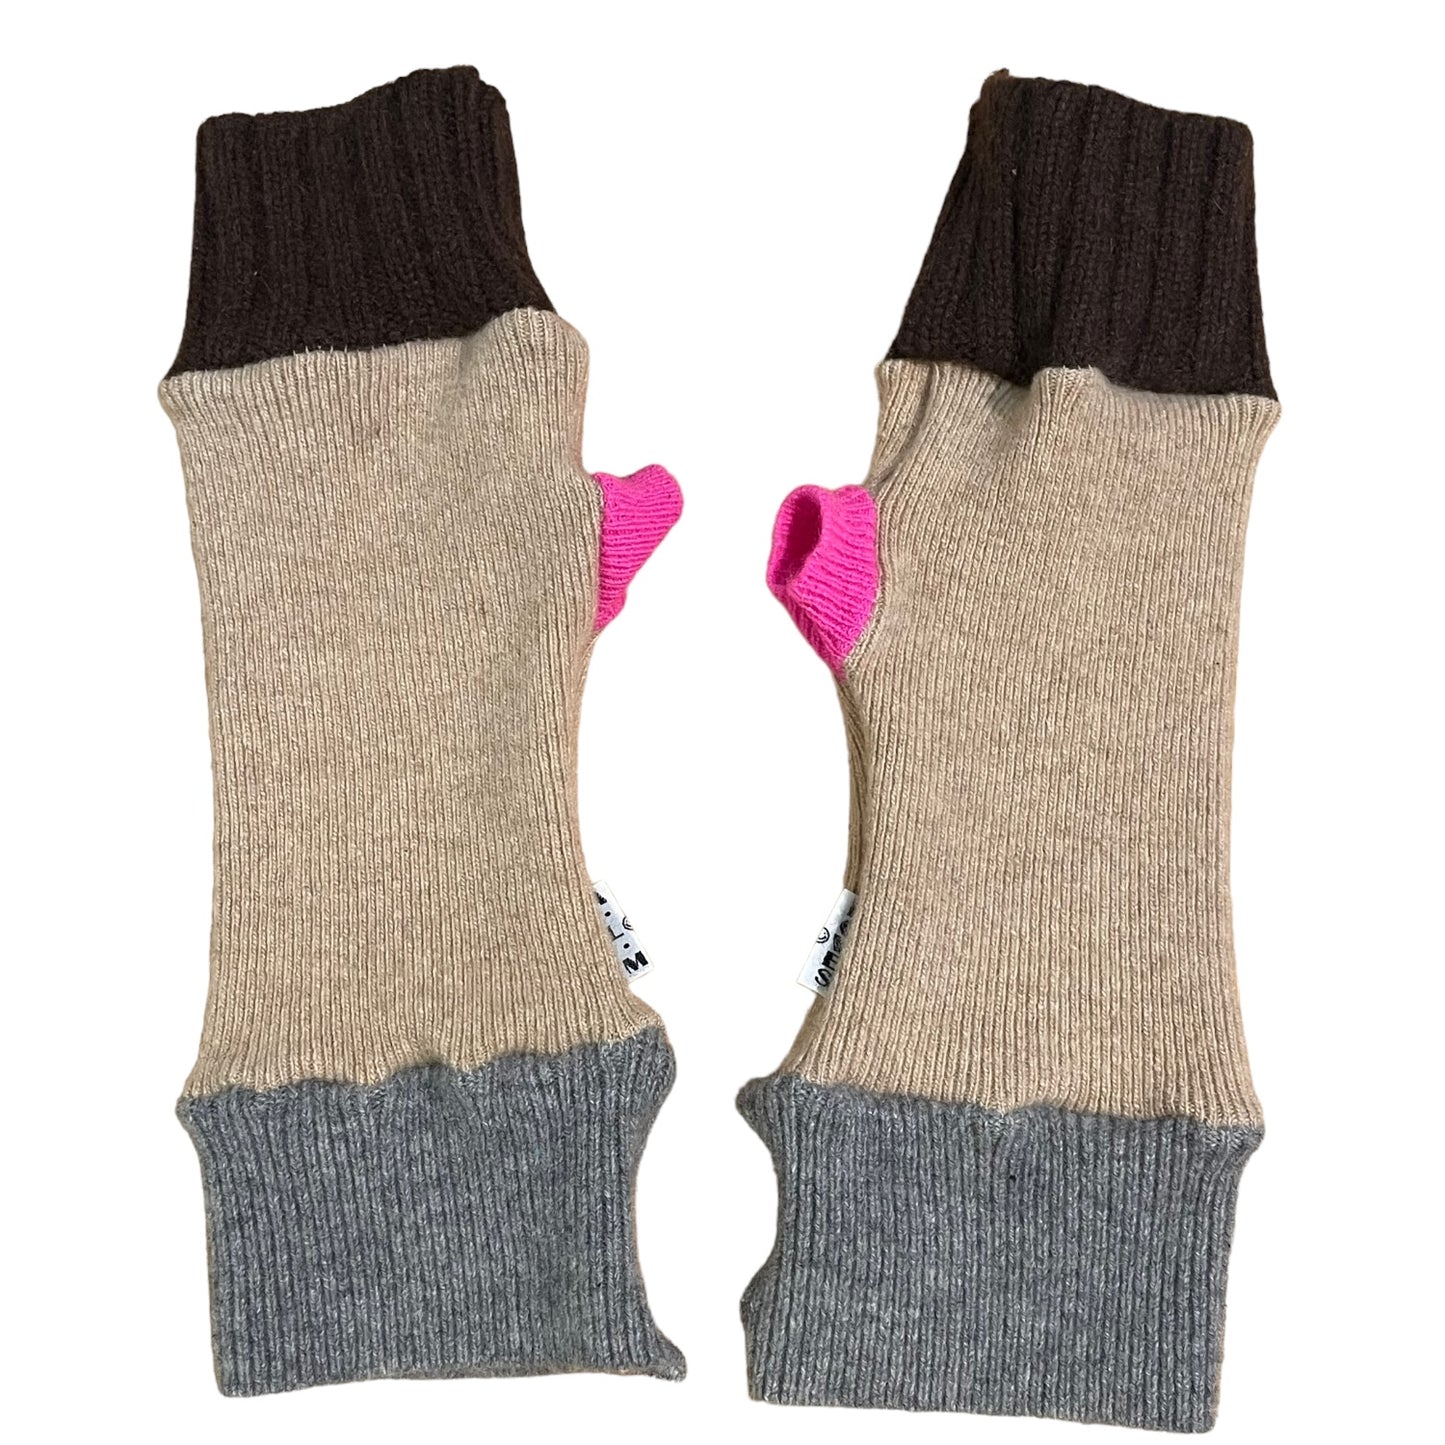 Recycled Cashmere Hand Warmer Gloves #5